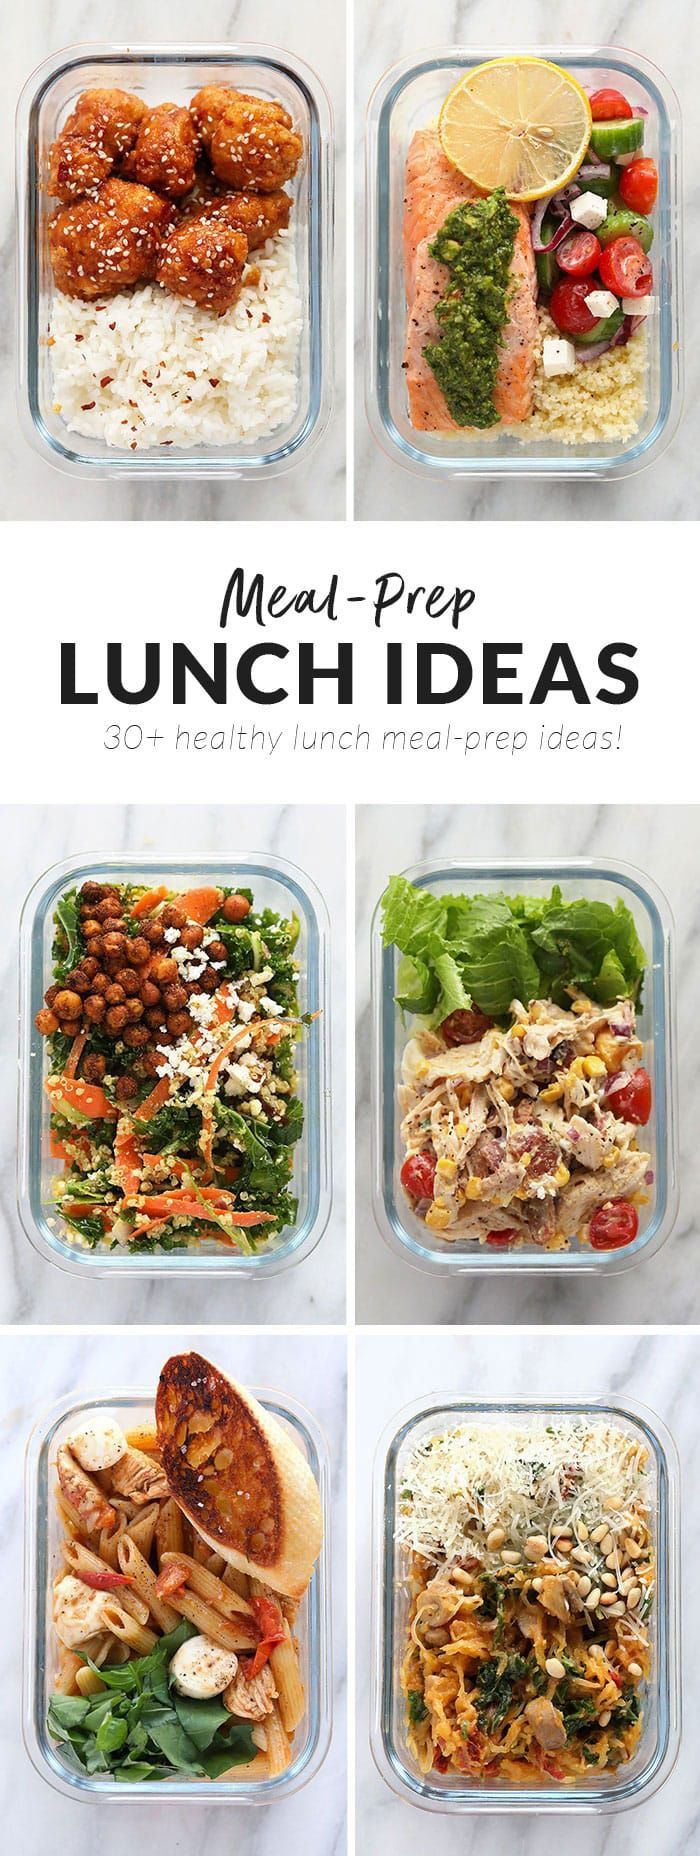 Delicious Healthy Lunch Ideas (30+ Meal Prep Ideas) - Fit Foodie Finds -   18 meal prep recipes for the week lunches ideas